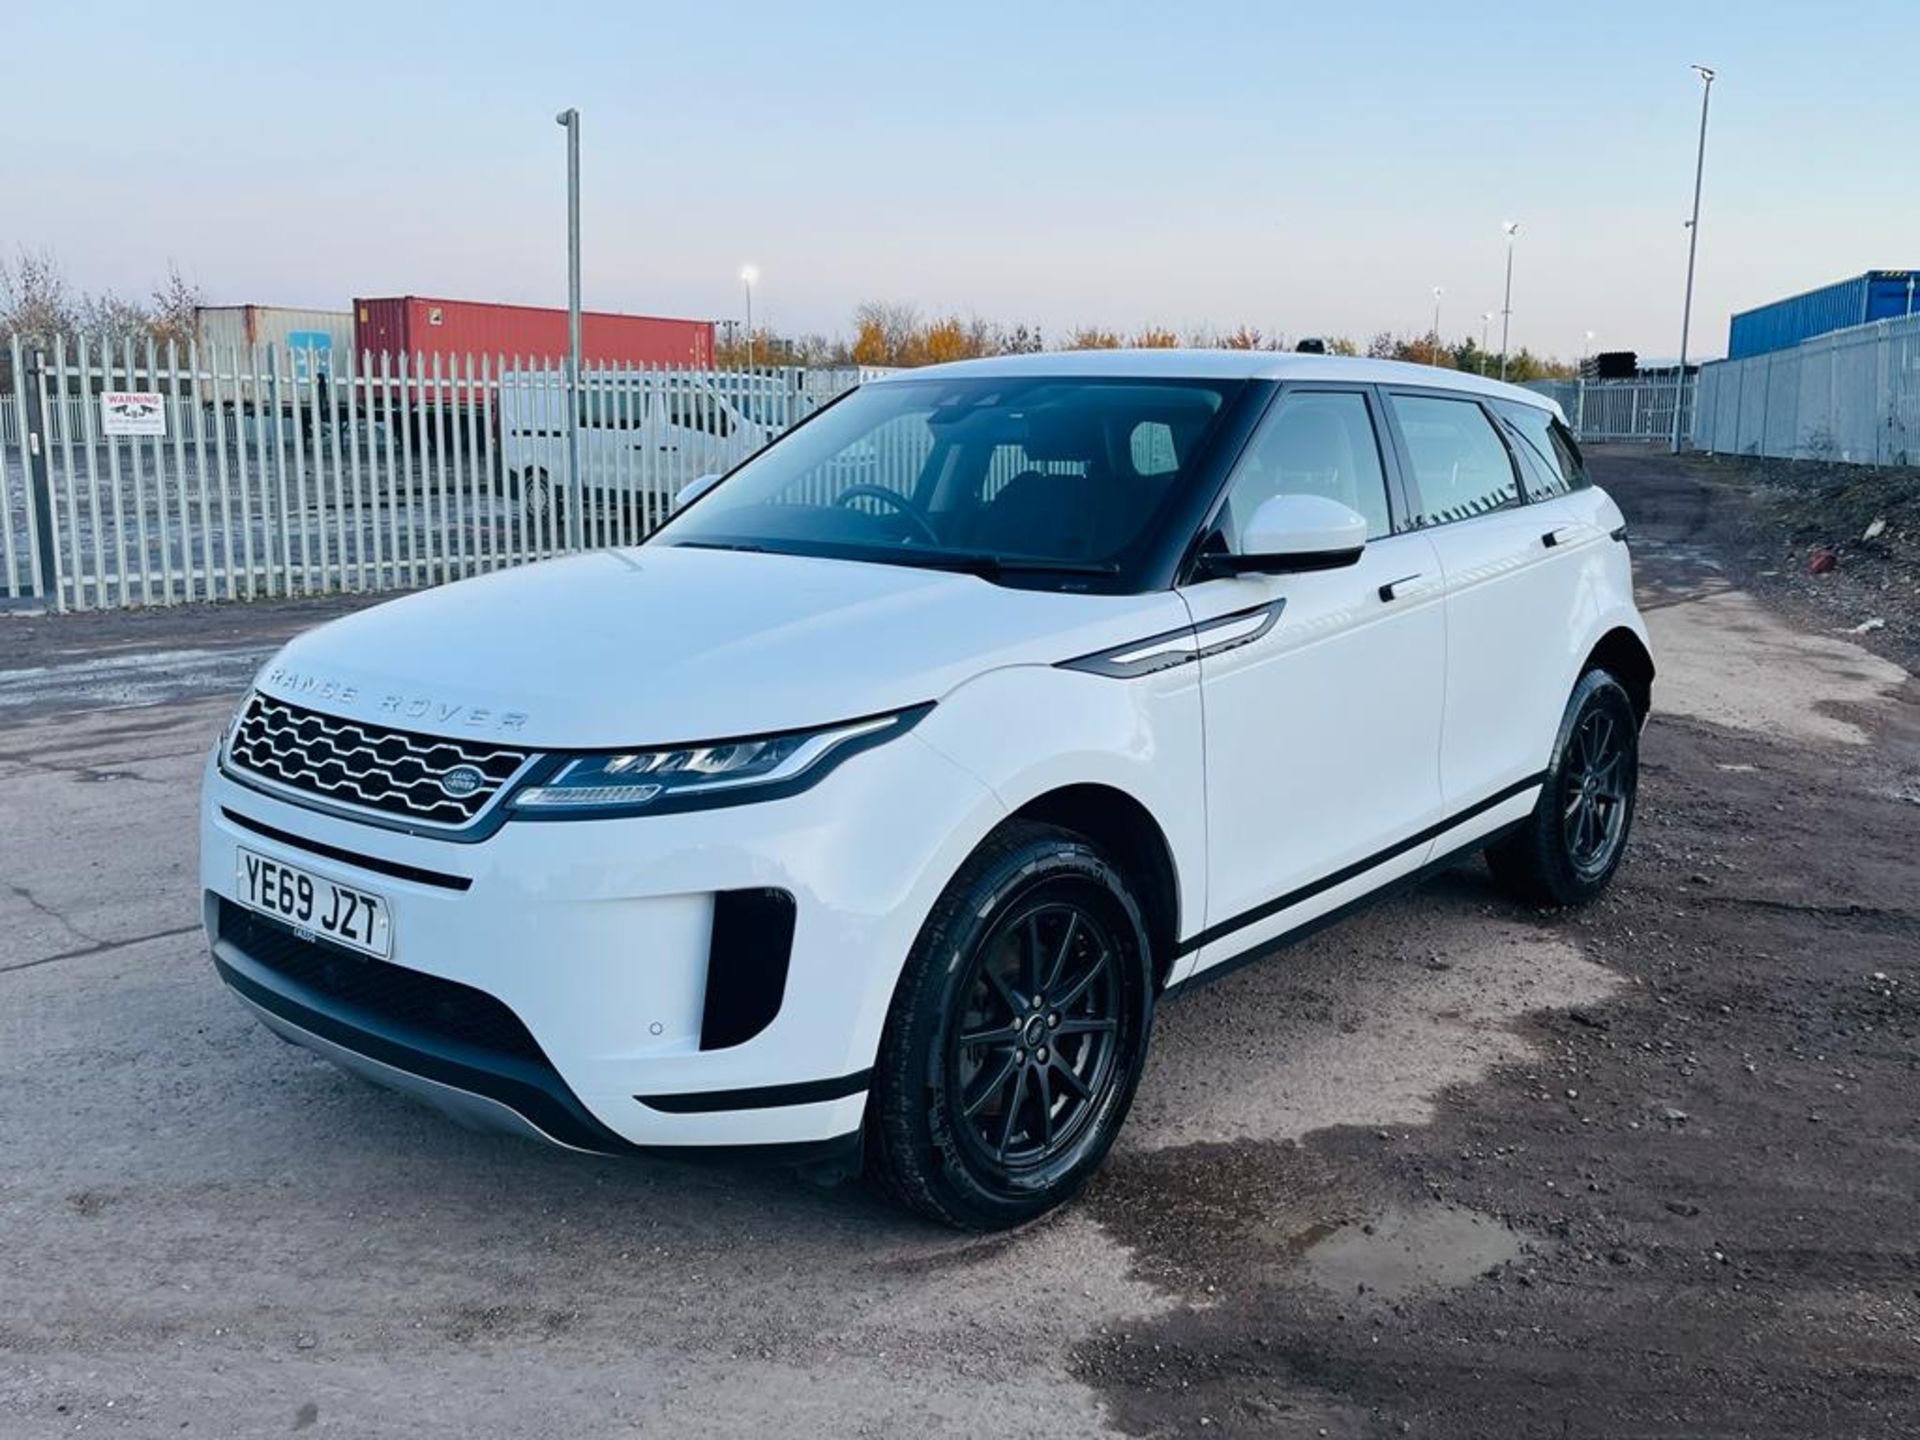 ** ON SALE ** Land Rover Range Rover Evoque 2.0 D150 2019 '69 Reg' A/C - Only 43,987 Miles - Image 3 of 32